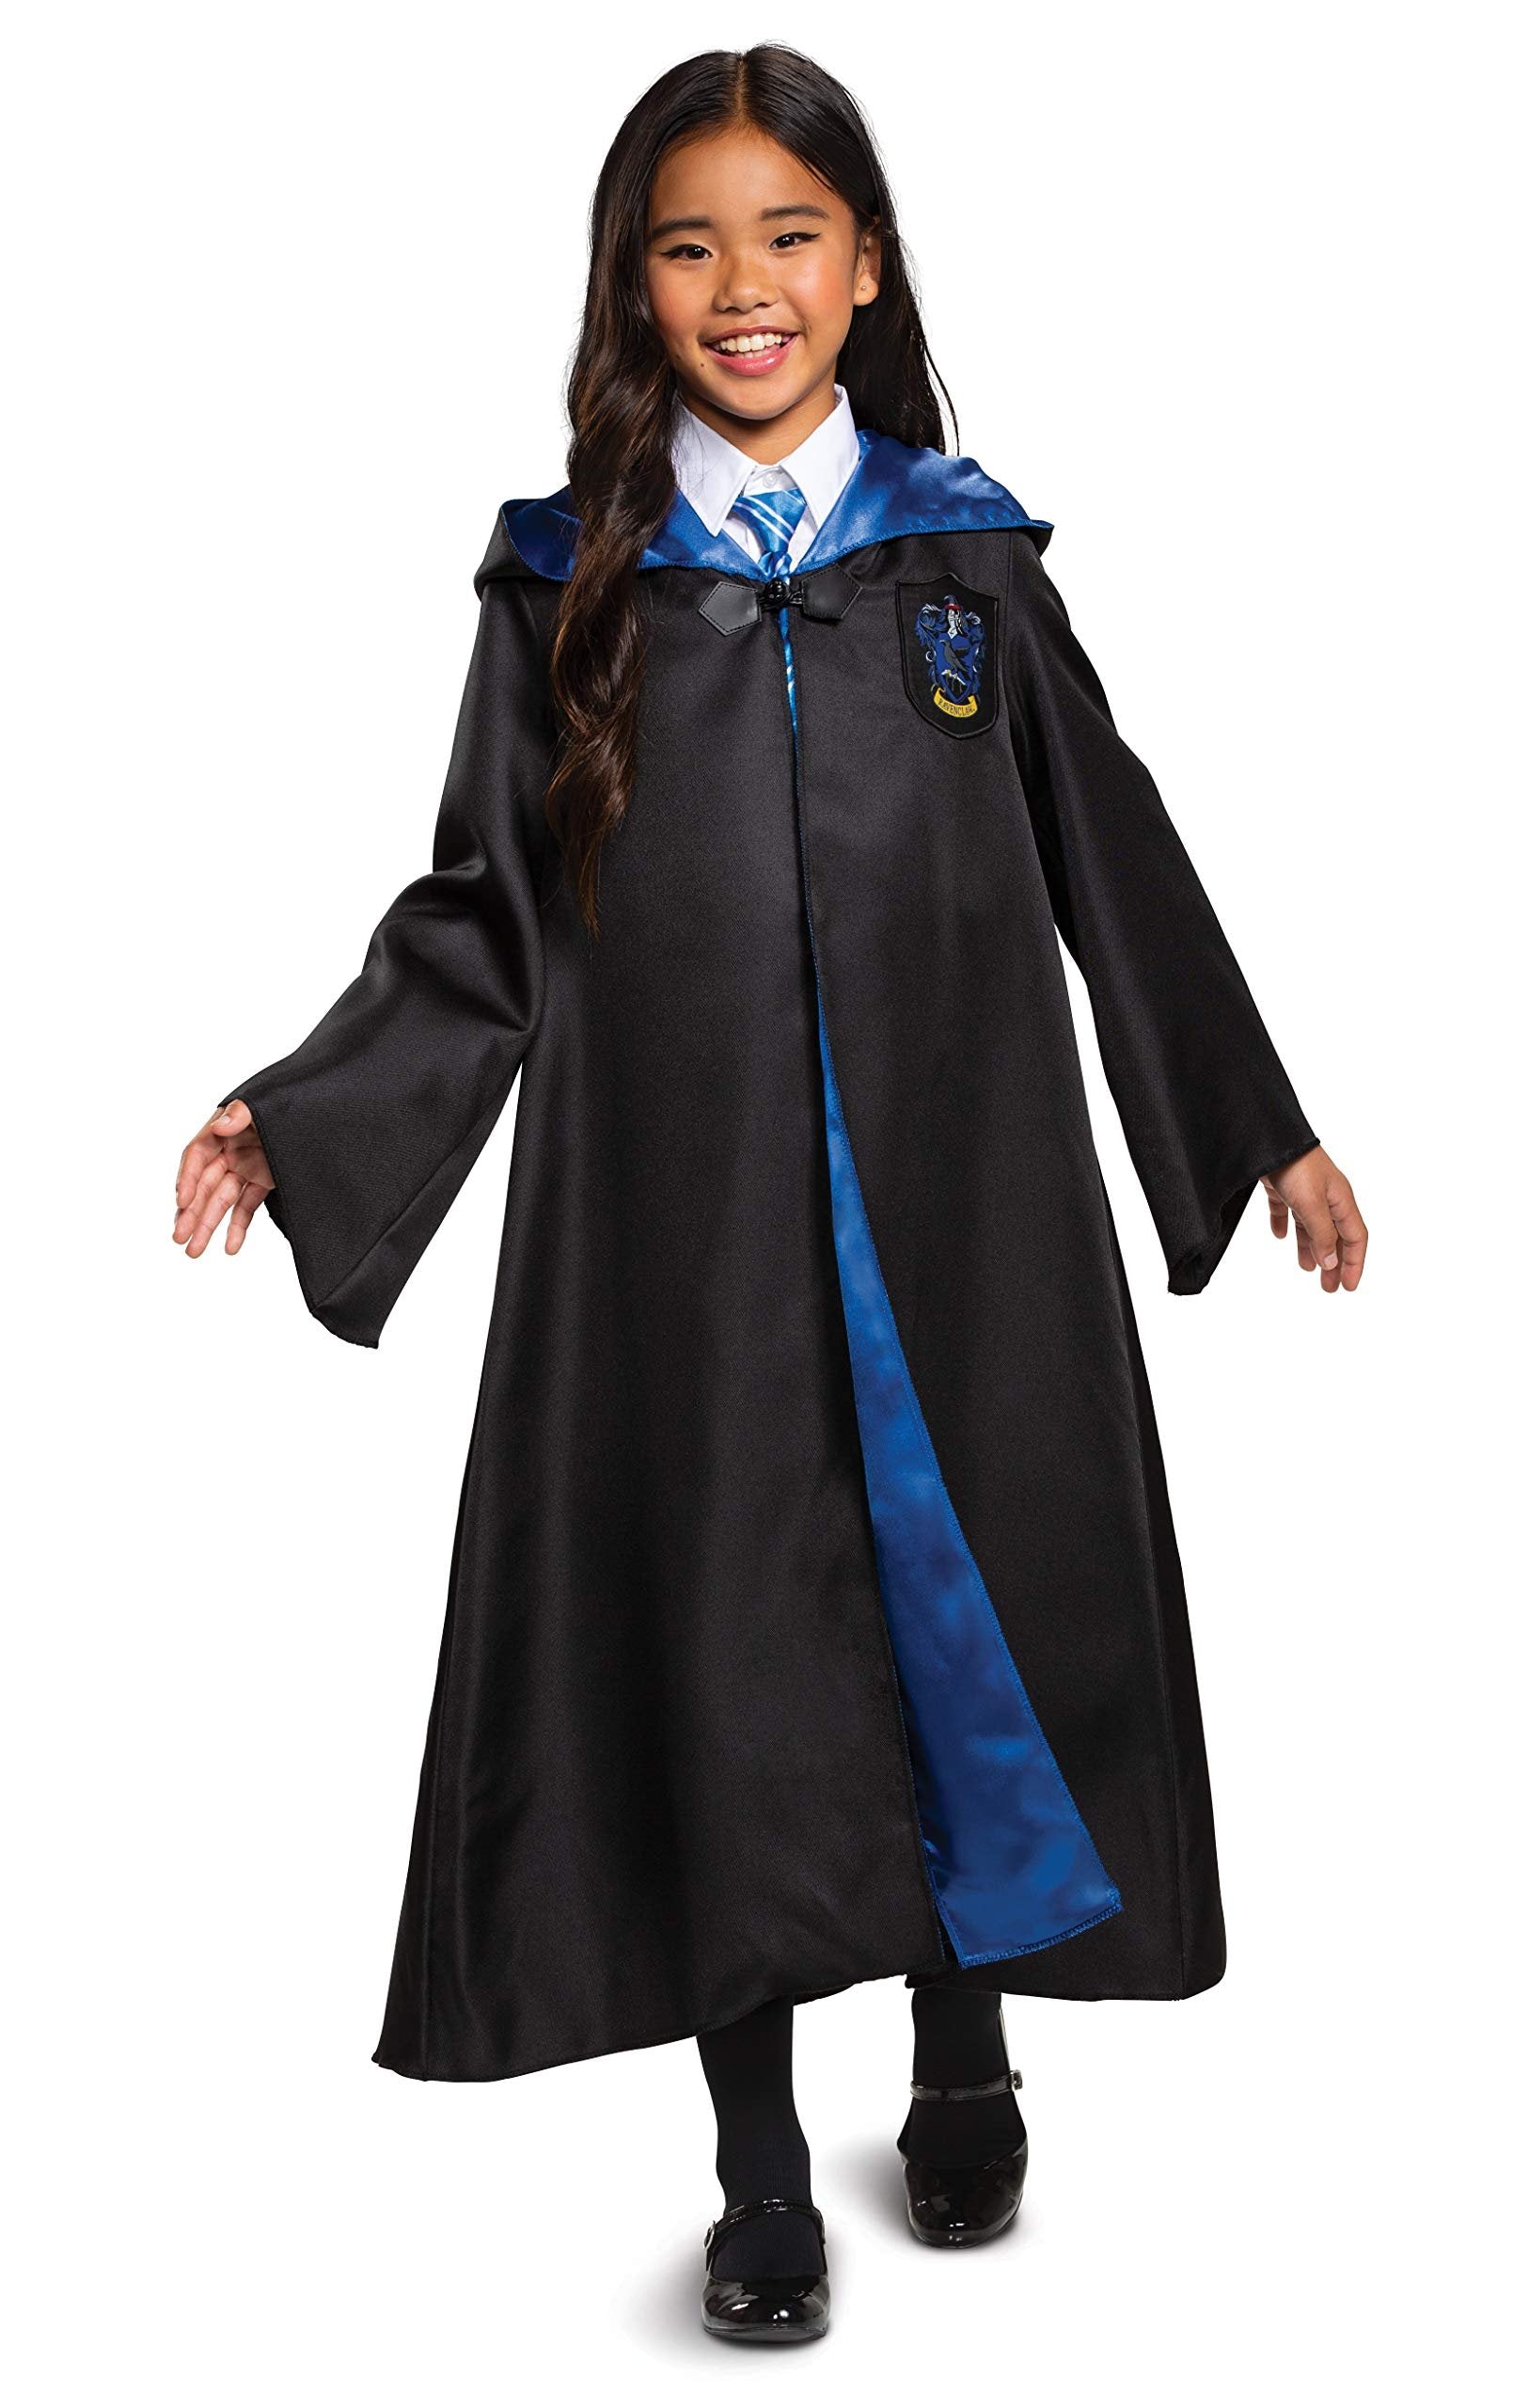 Disguise Harry Potter Ravenclaw Robe Deluxe Children's Costume Accessory, Black & Blue, Kids Size Large (10-12)